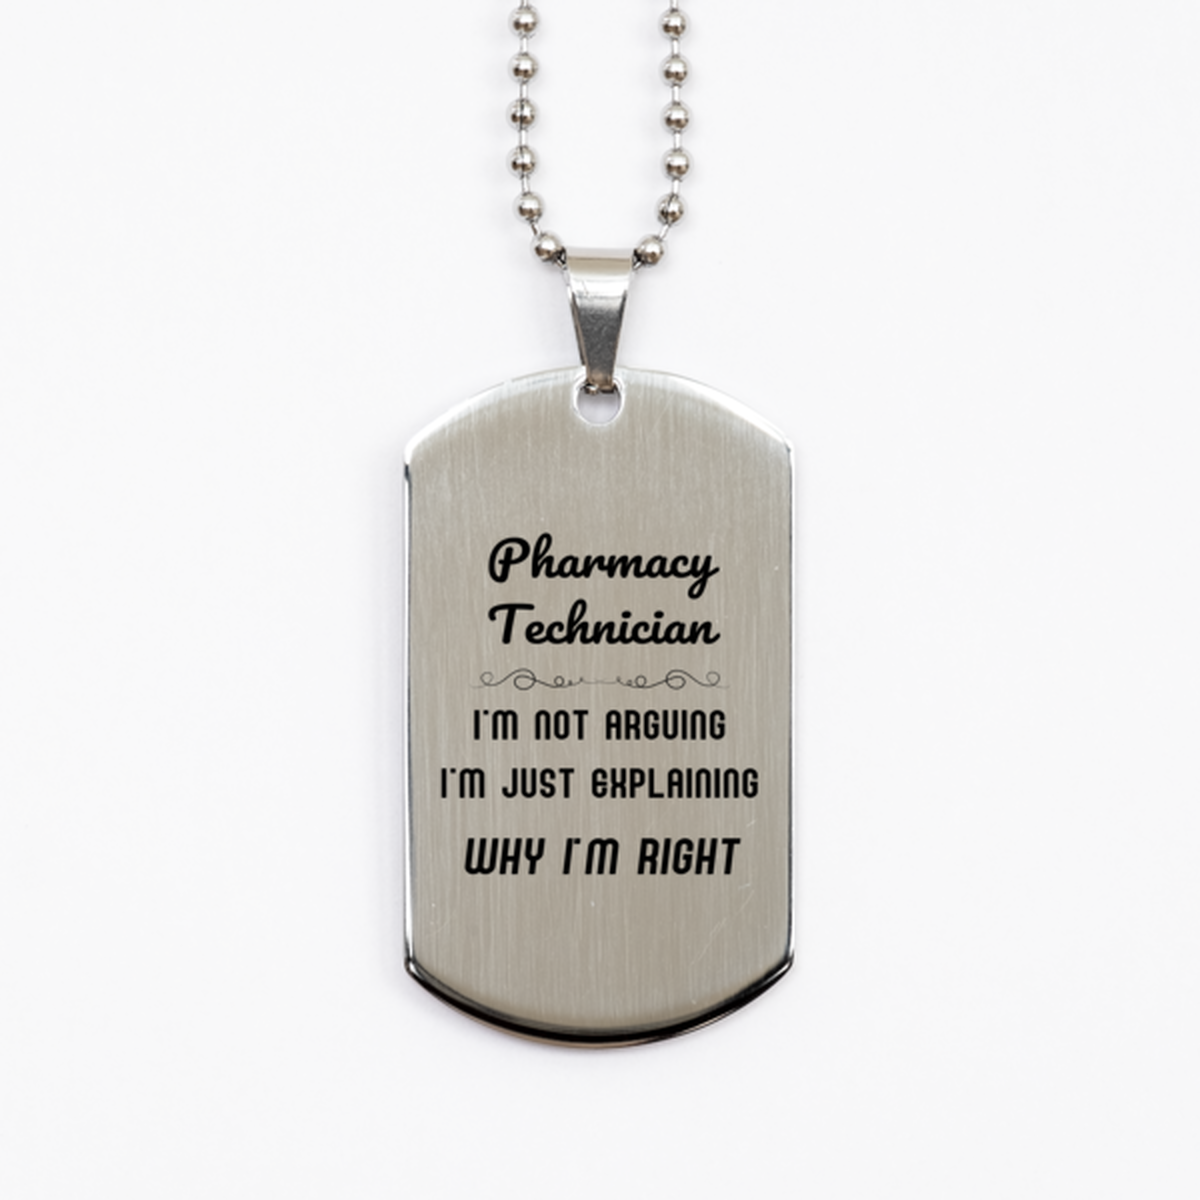 Pharmacy Technician I'm not Arguing. I'm Just Explaining Why I'm RIGHT Silver Dog Tag, Funny Saying Quote Pharmacy Technician Gifts For Pharmacy Technician Graduation Birthday Christmas Gifts for Men Women Coworker